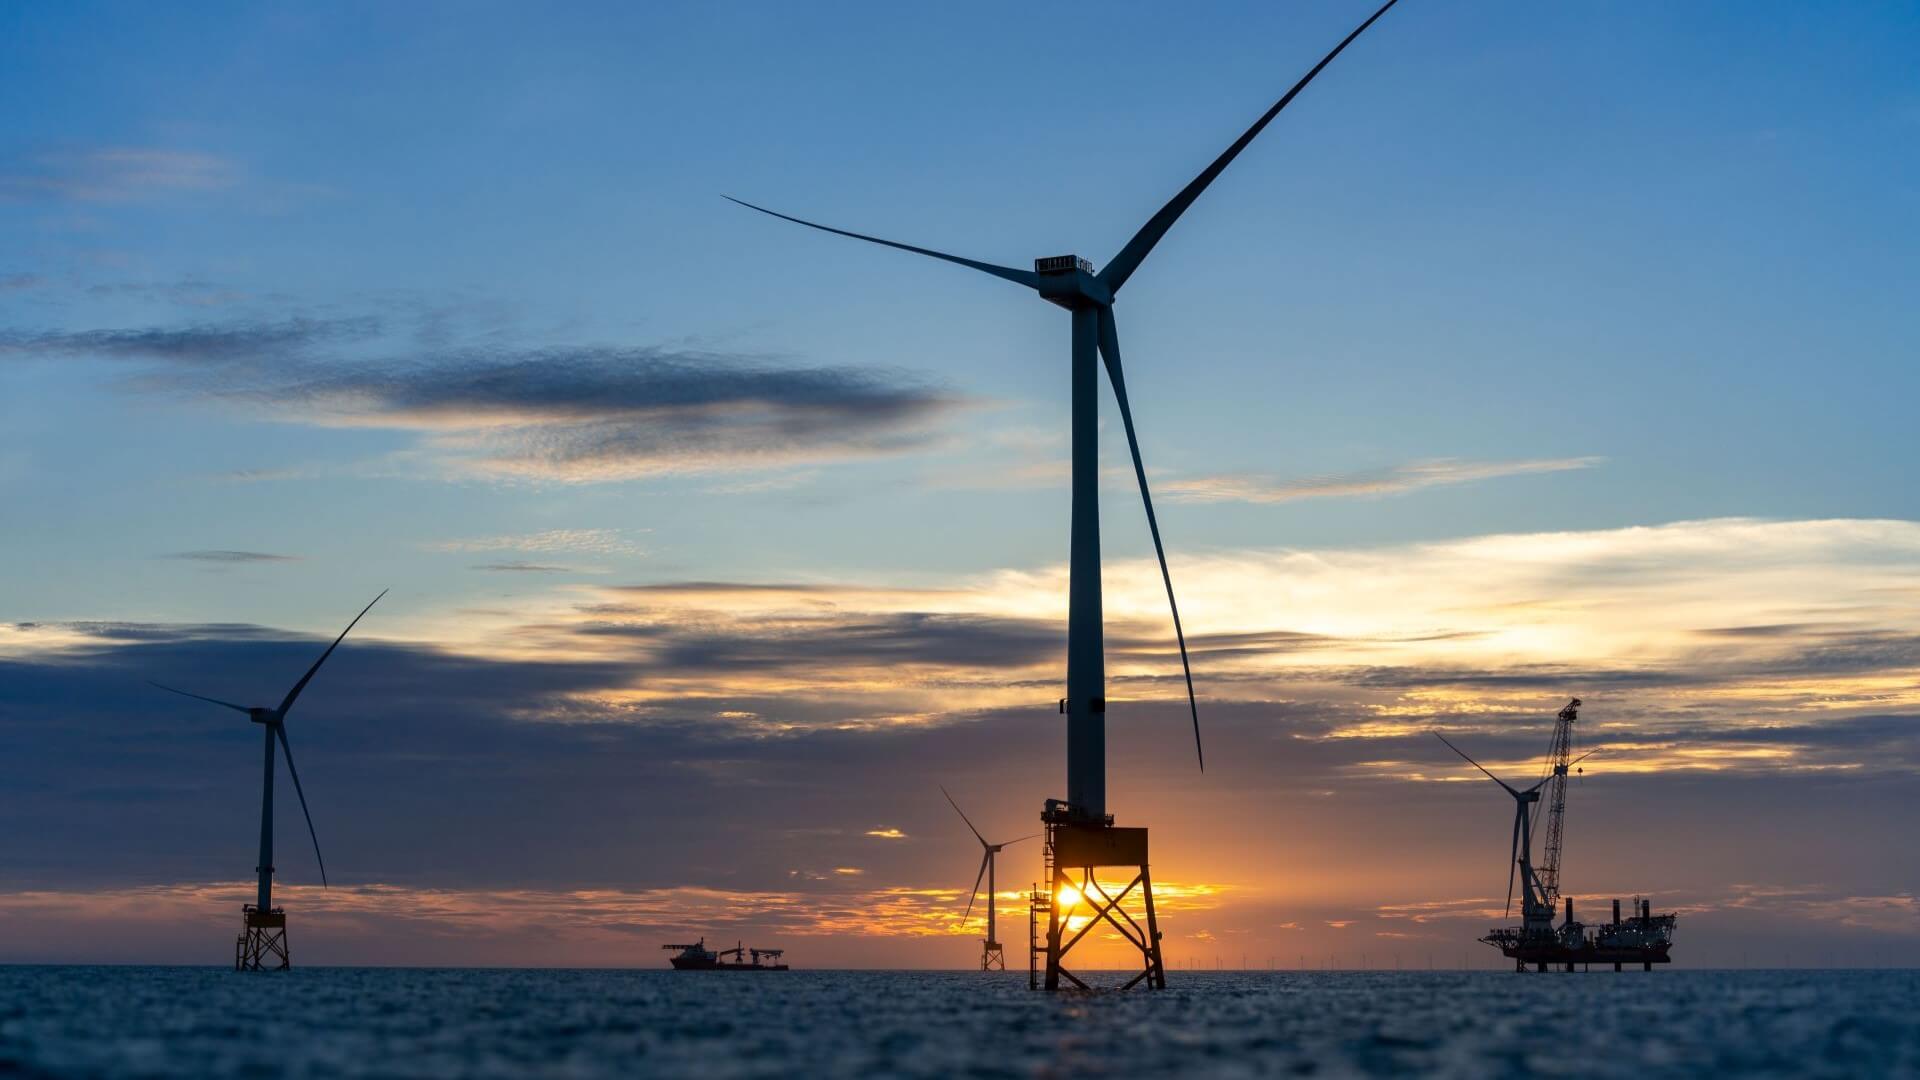 Four offshore wind turbines in calm sea silhouetted against sunset sky